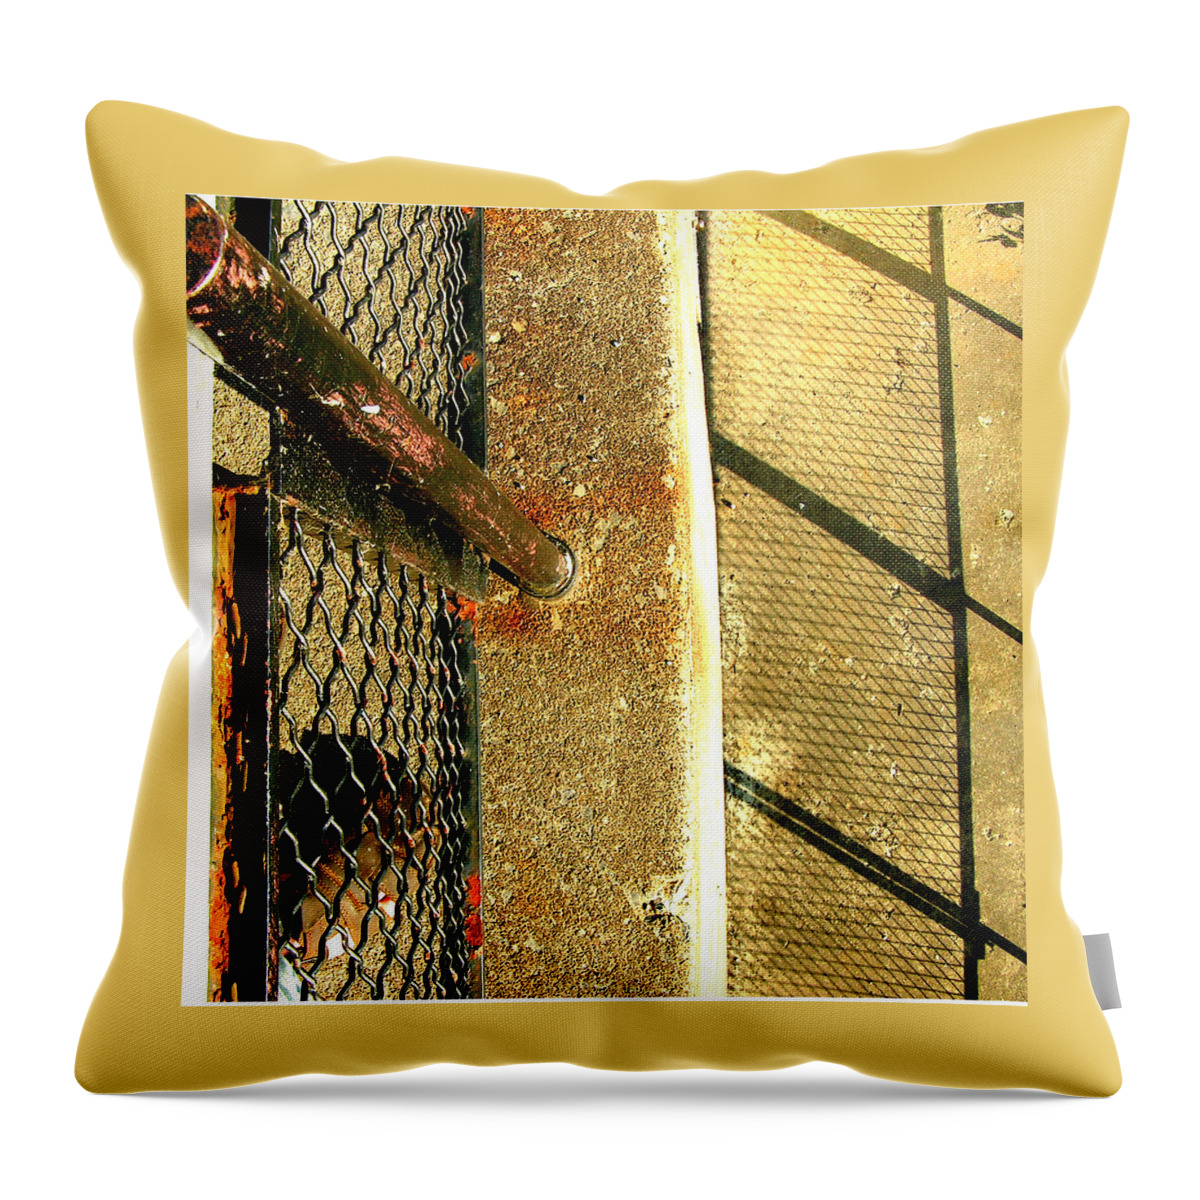  Throw Pillow featuring the photograph Urban Confines by Adrian Maggio